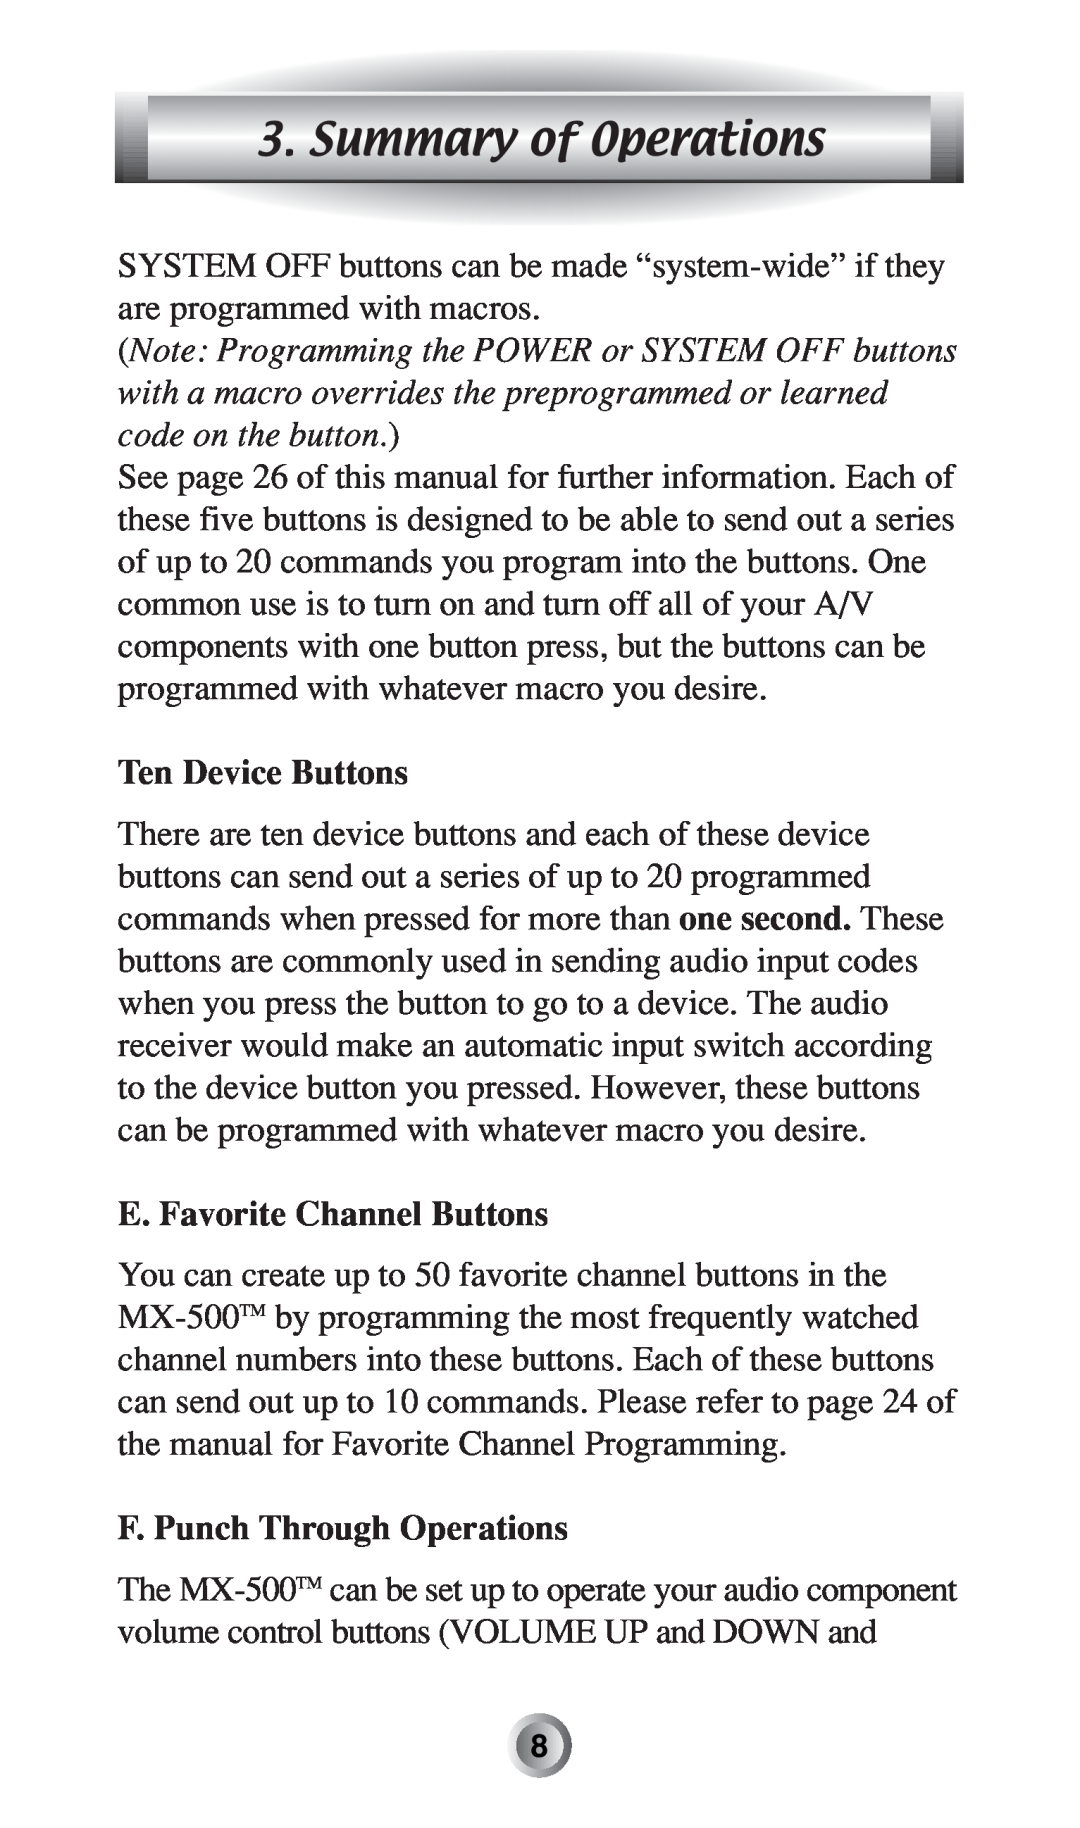 Radio Shack MX-500TM Summary of Operations, Ten Device Buttons, E. Favorite Channel Buttons, F. Punch Through Operations 